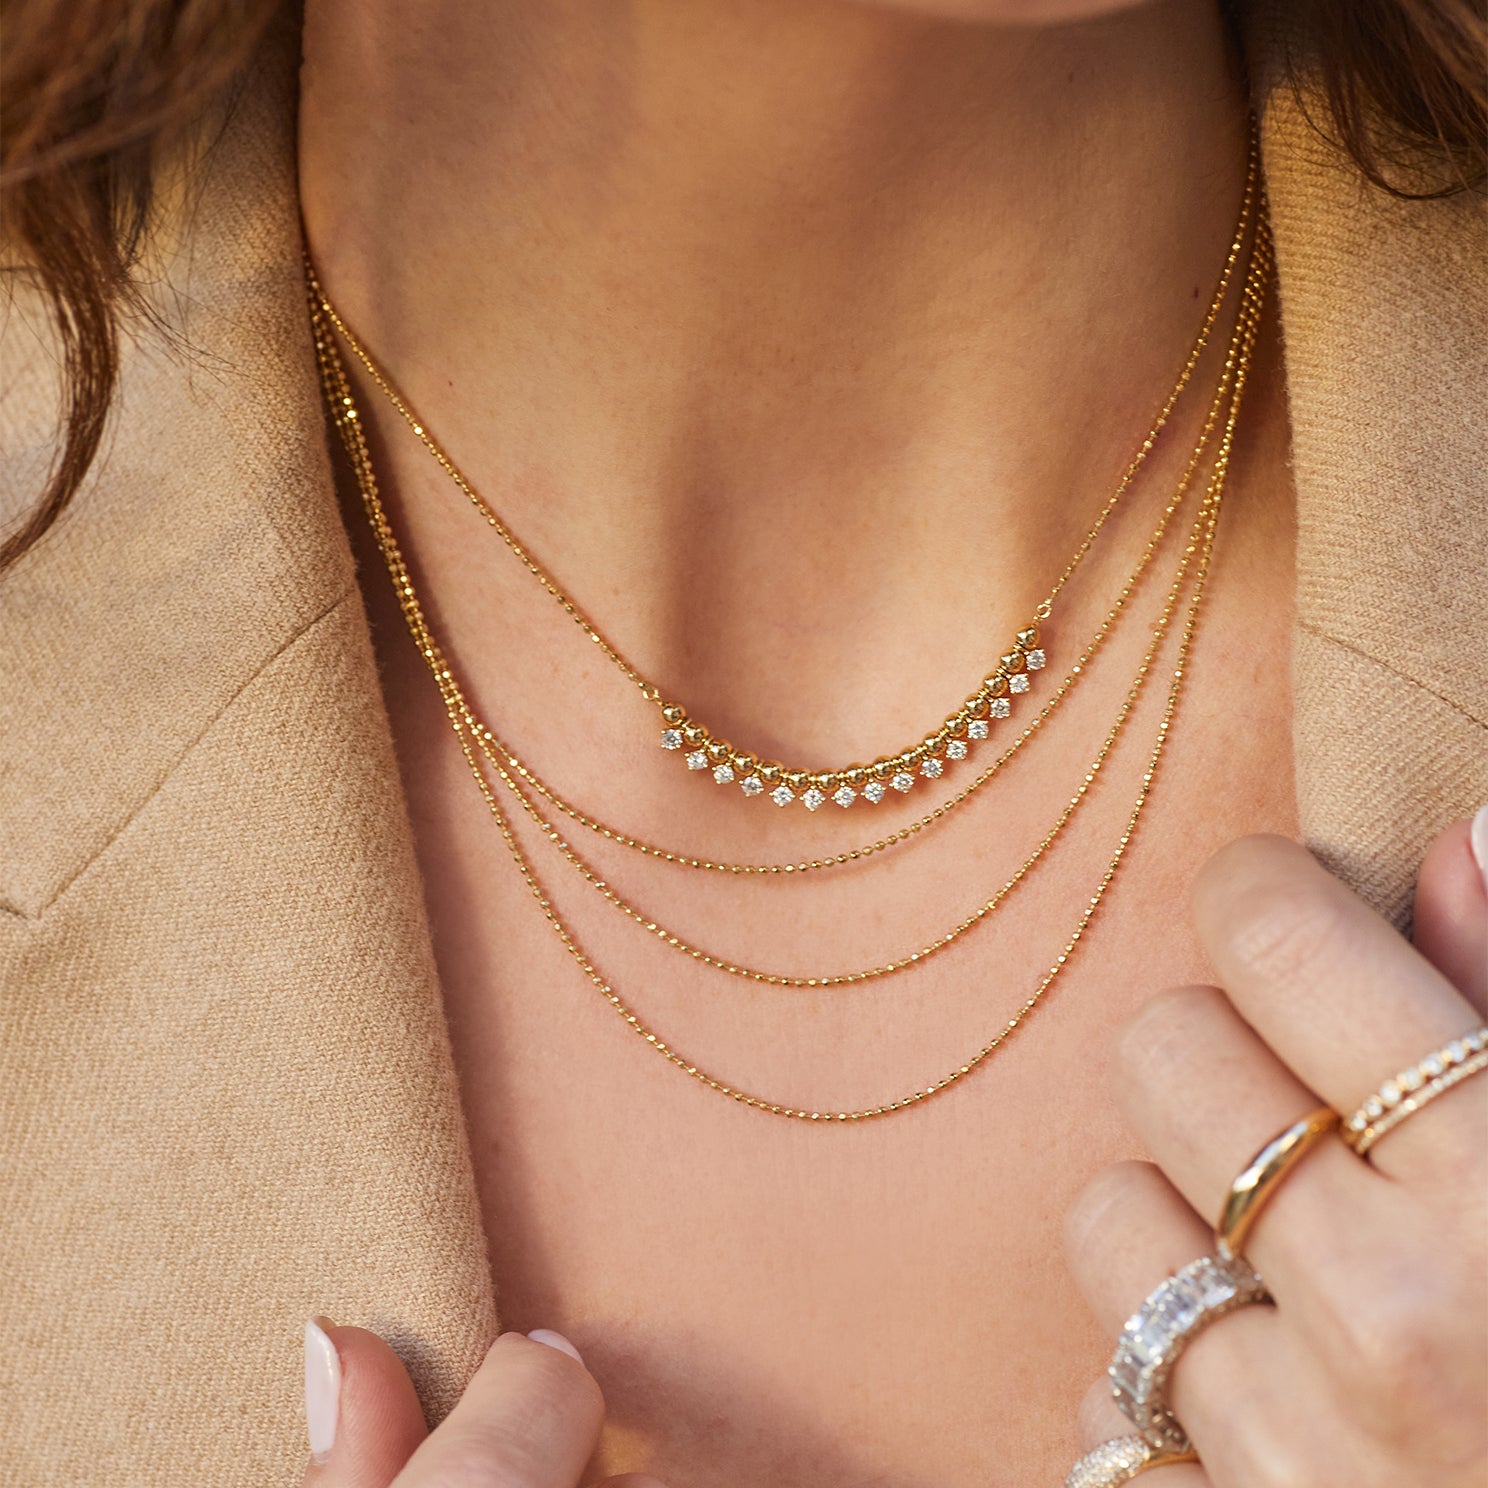 Diamond & Gold Ball Necklace in 14k yellow gold styled with layering necklace on neck of model